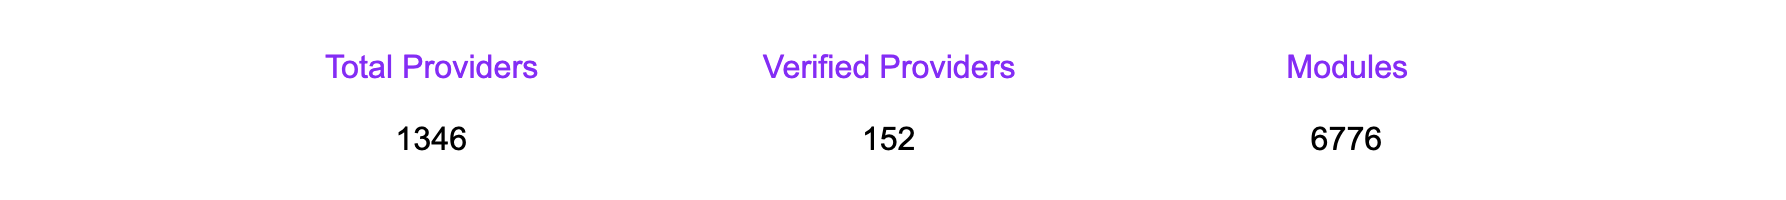 Total providers, 1343, verified providers 146, modules 6766